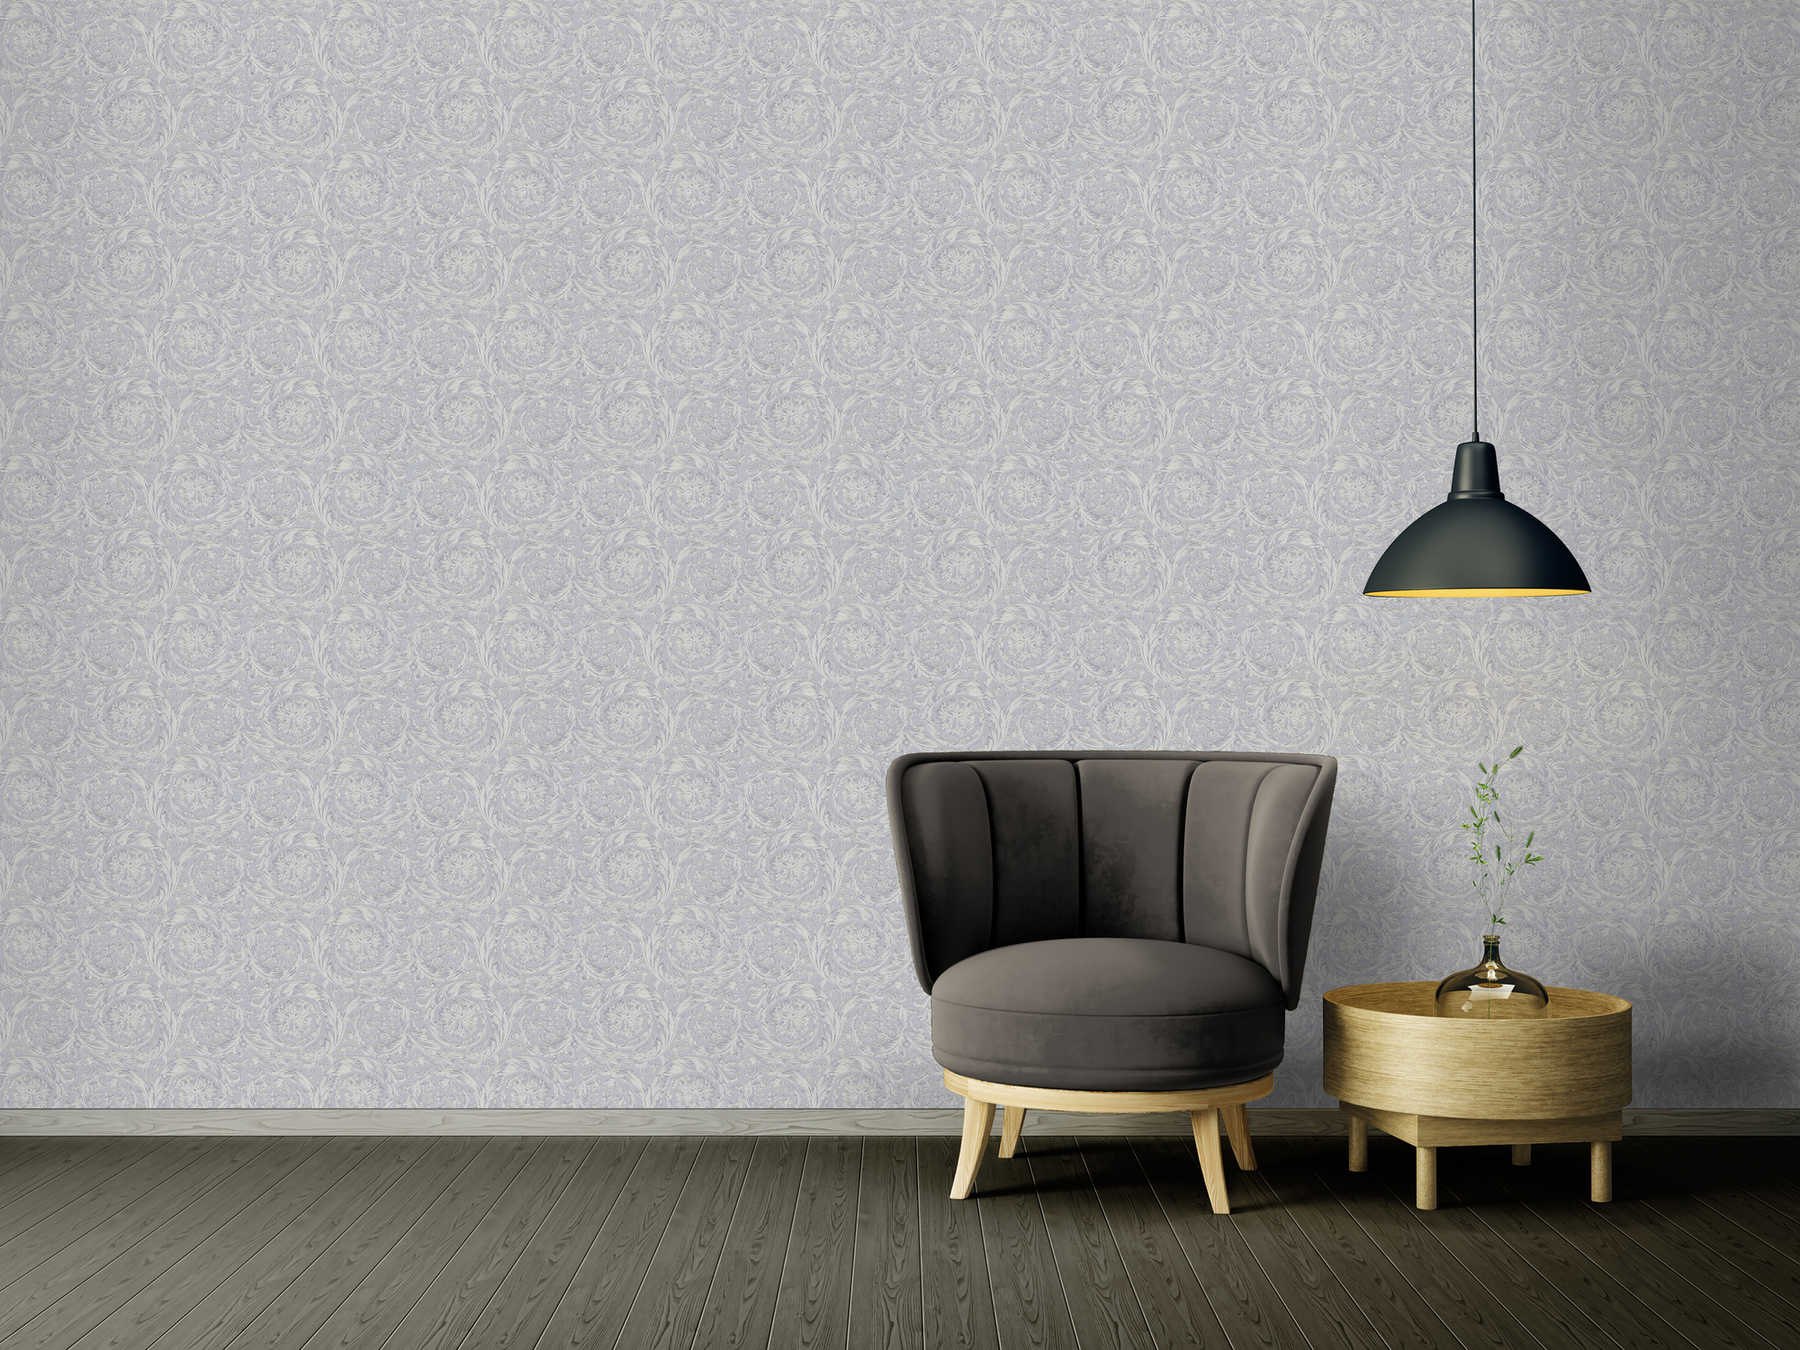             Silver VERSACE wallpaper shimmer effects - silver, grey
        